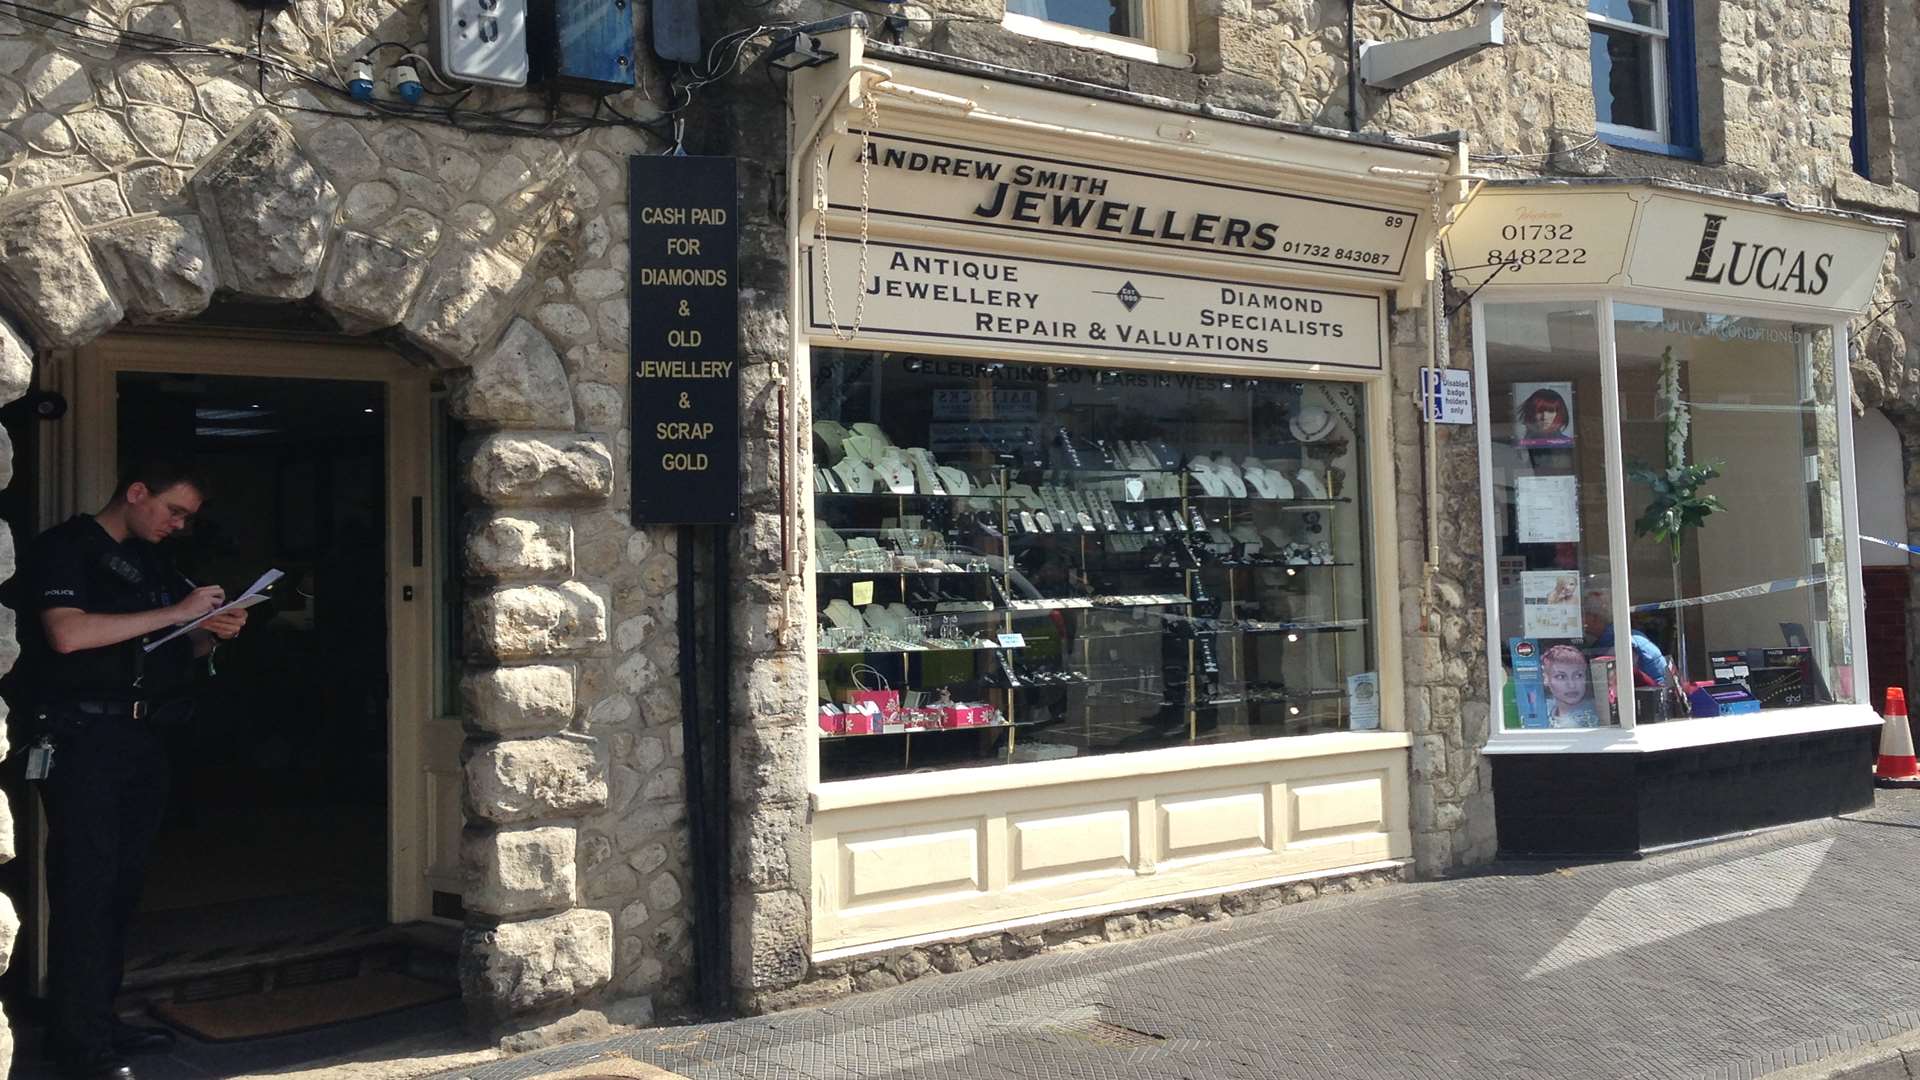 Andrew Smith Jewellers in West Malling High Street